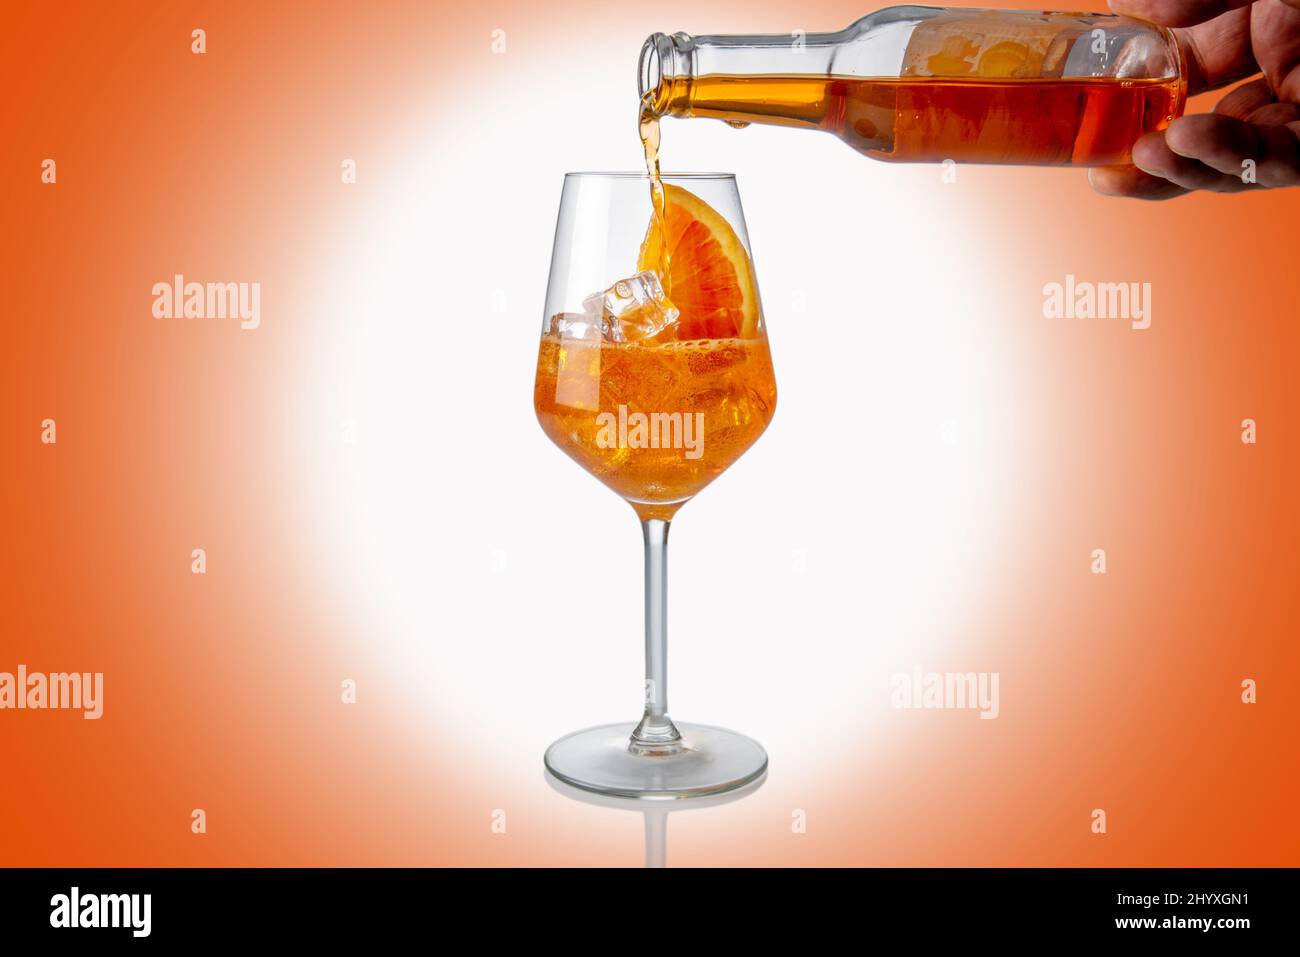 Aperol Spritz Bottle High Resolution Stock Photography and Images - Alamy